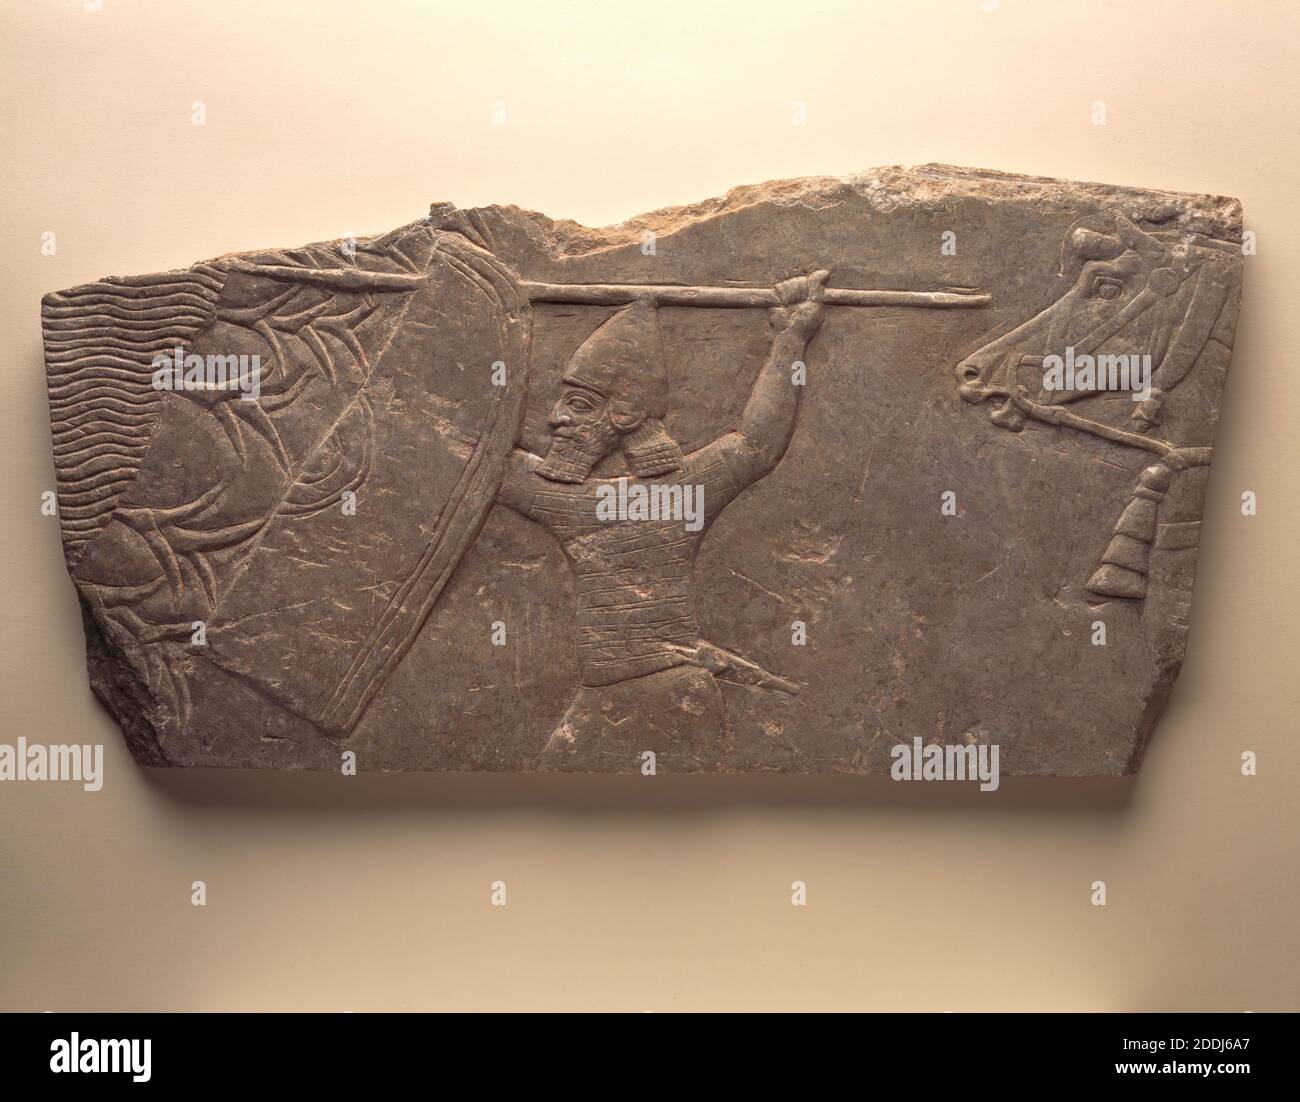 Fragment of a Carved Relief from a Palace Wall, 668 BC-627 BC Iraq, Nineveh h522 x w285 x d26 mm, Flat limestone slab showing Assyrian lancer advancing left into reeds by the side of a marsh of pool., Asia, Western Asiatic, Armour, Middle East, Architecture, Animal, Horse, Relief, Antiquities, Ancient Civilisations, Soldier, Stone Carving, Stone, Limestone Stock Photo